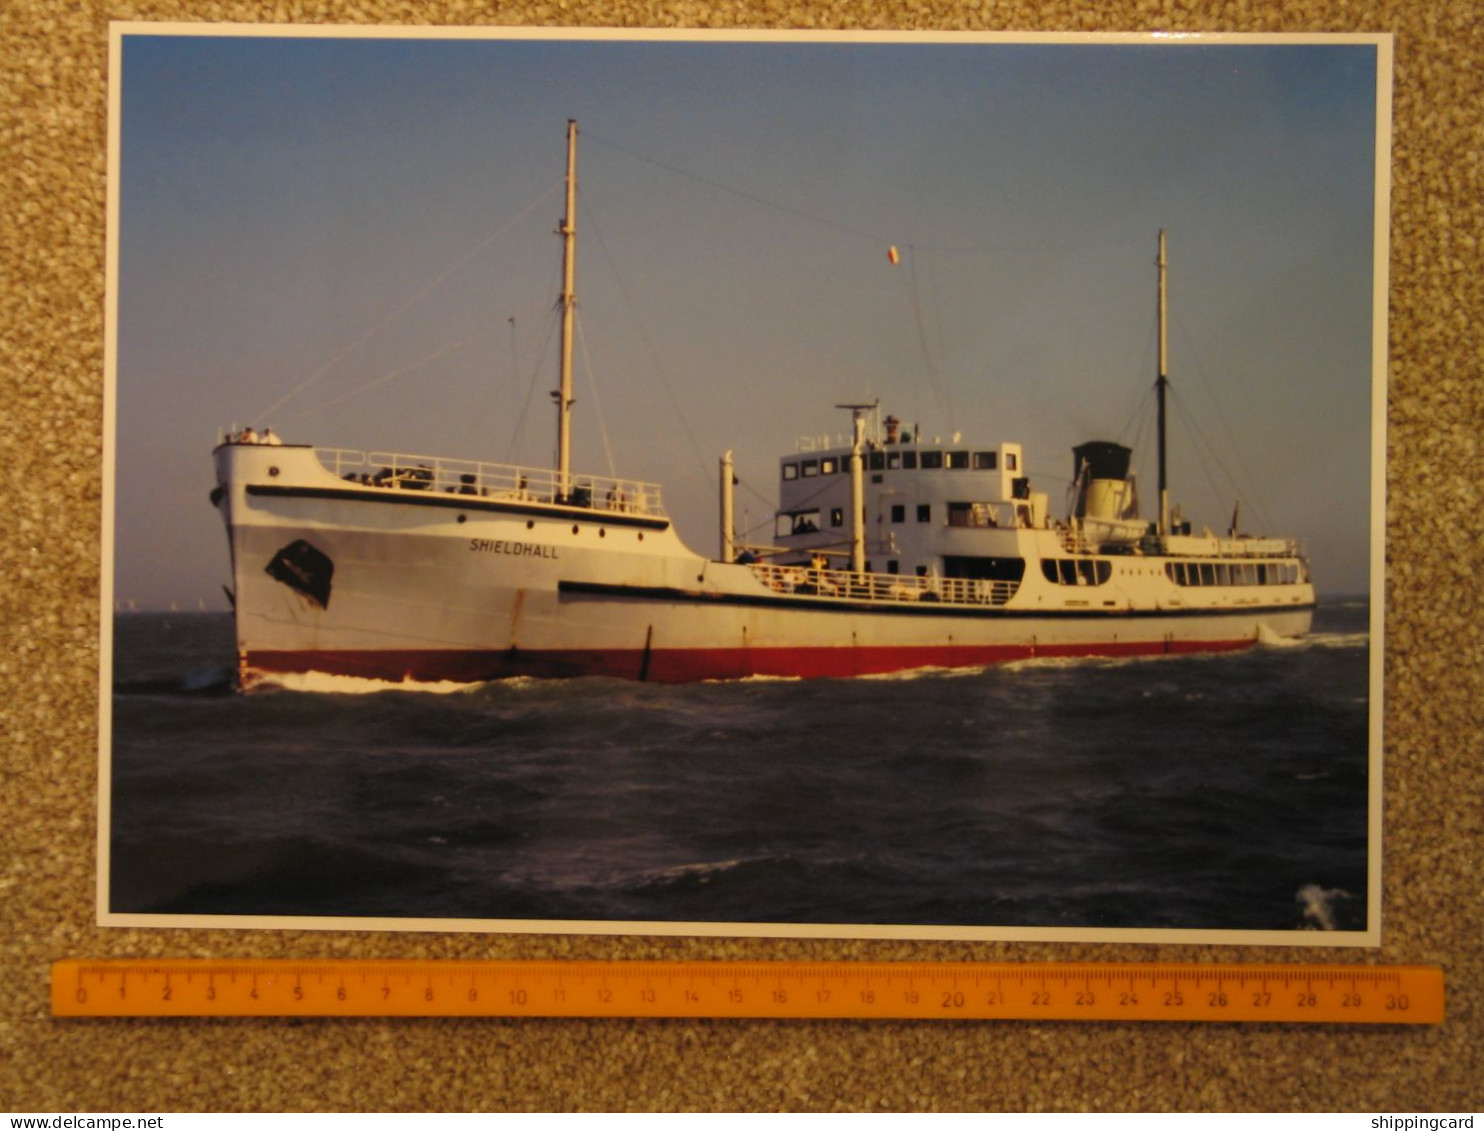 SHIELDHALL LARGE PHOTO - APPROX 200 X 300MM - Petroleros